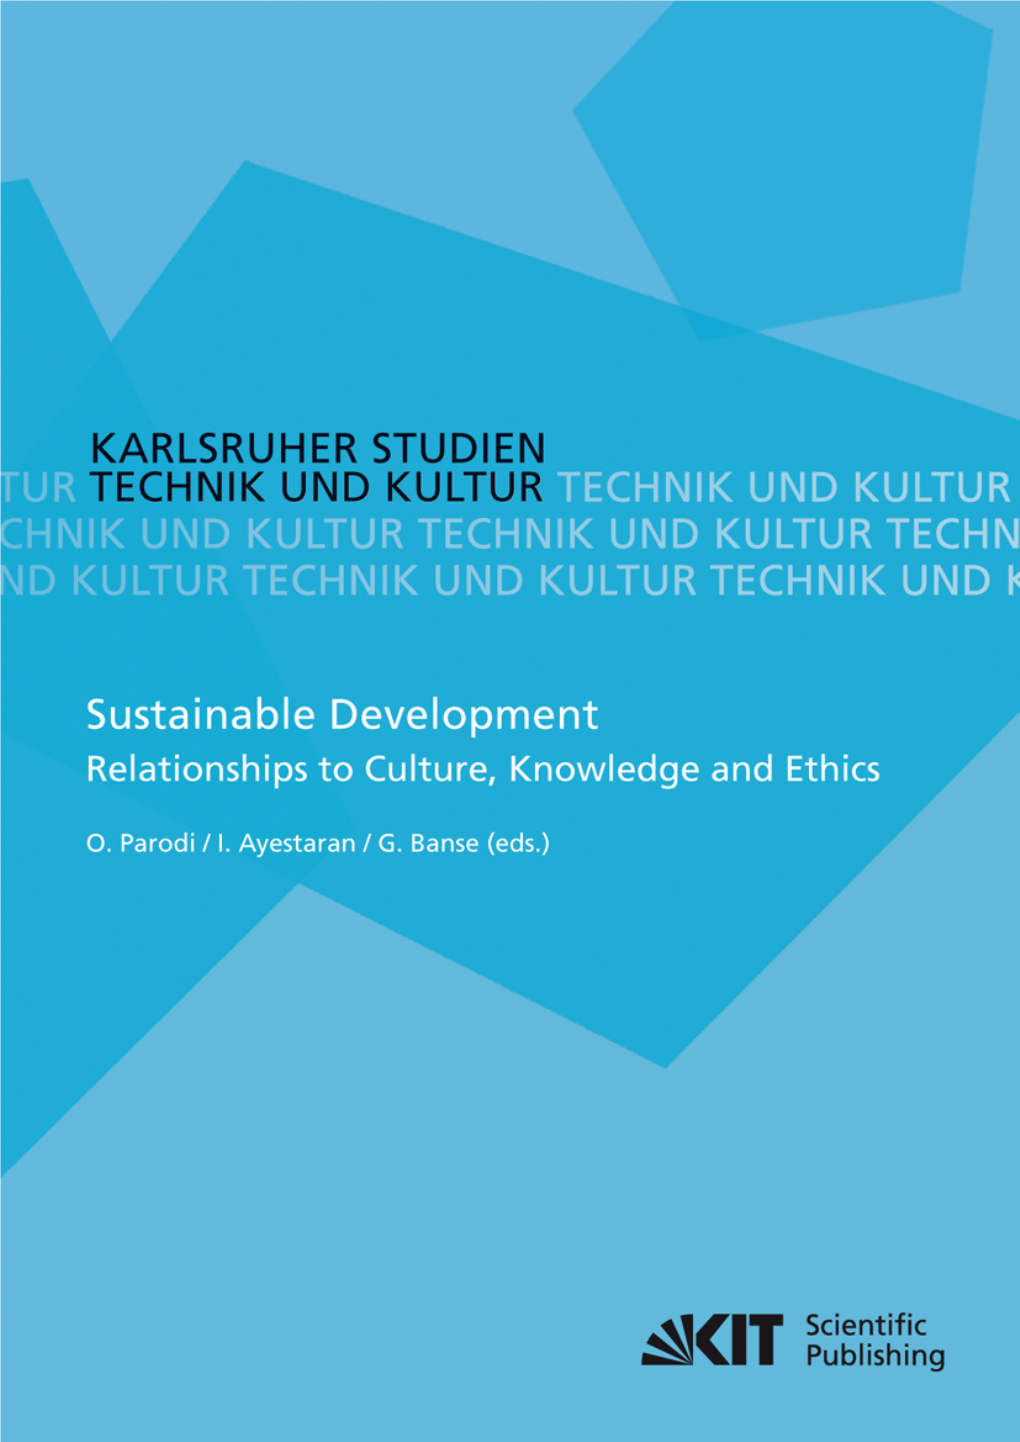 Sustainable Development – Relationships to Culture, Knowledge and Ethics Karlsruher Studien Technik Und Kultur Band 3